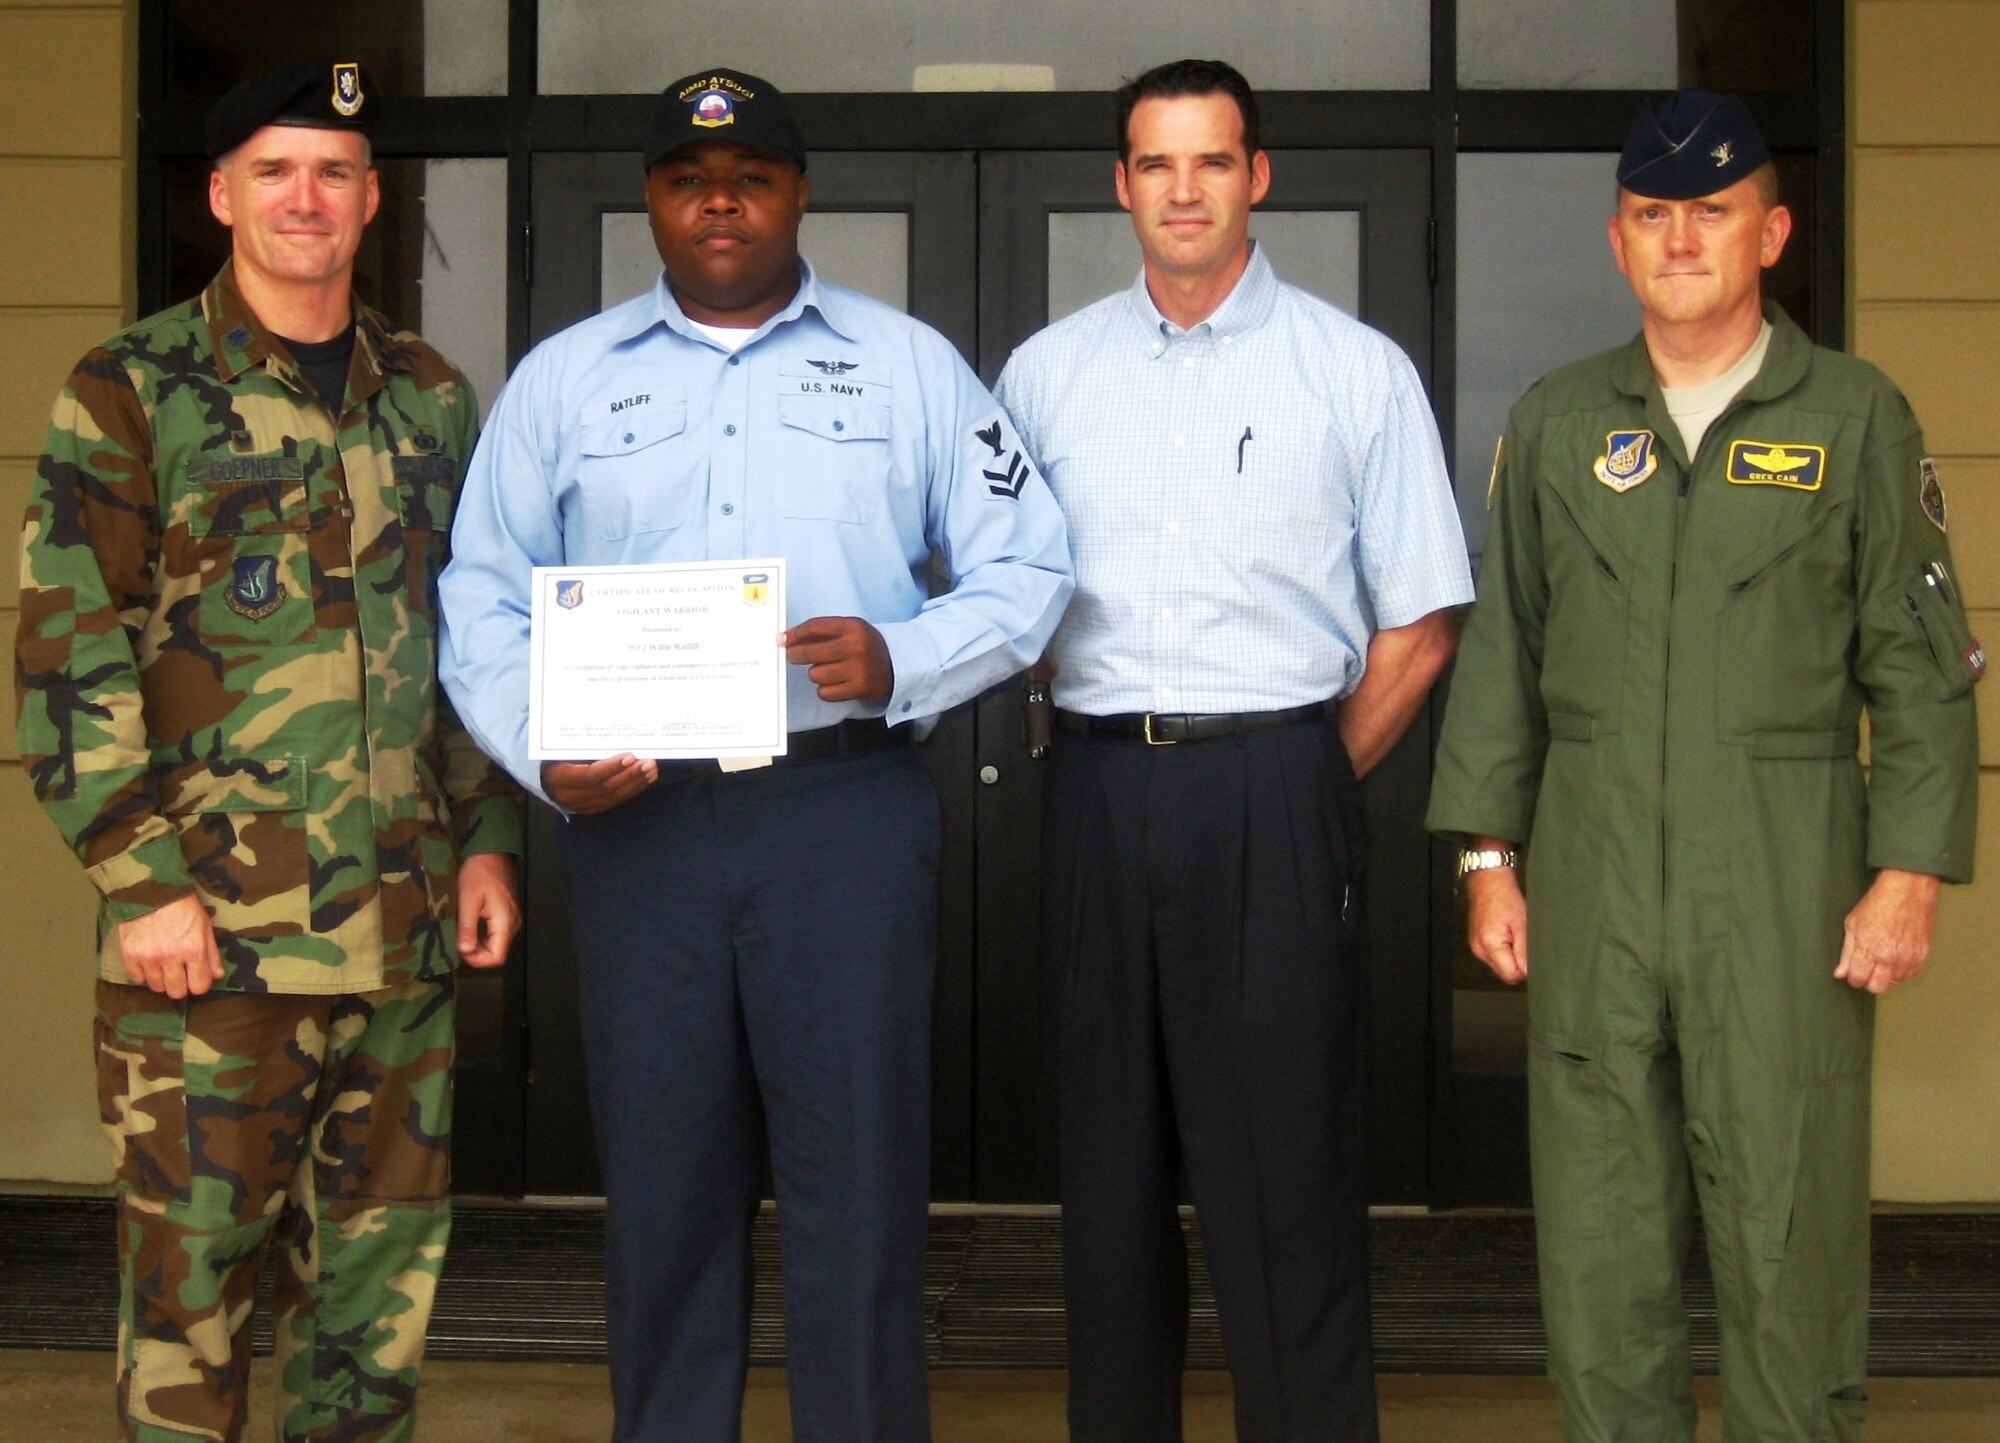 Aviation Support Equipment Technician Second Class Willie L. Ratliff is presented with the Vigilant Warrior certificate by (from left) Lt. Col. Erik Goepner, 36th Security Forces Squadron, Maj. William Wehner, AFOSI Detachment 602 acting commander, and Col. Gregory Cain, 36th Wing vice commander. AS2 Ratliff was awarded the honor after reporting suspicious individuals filming unauthorized footage of the flight line on Feb. 12 in a Vigilant Warrior scenario. (Courtesy photo)